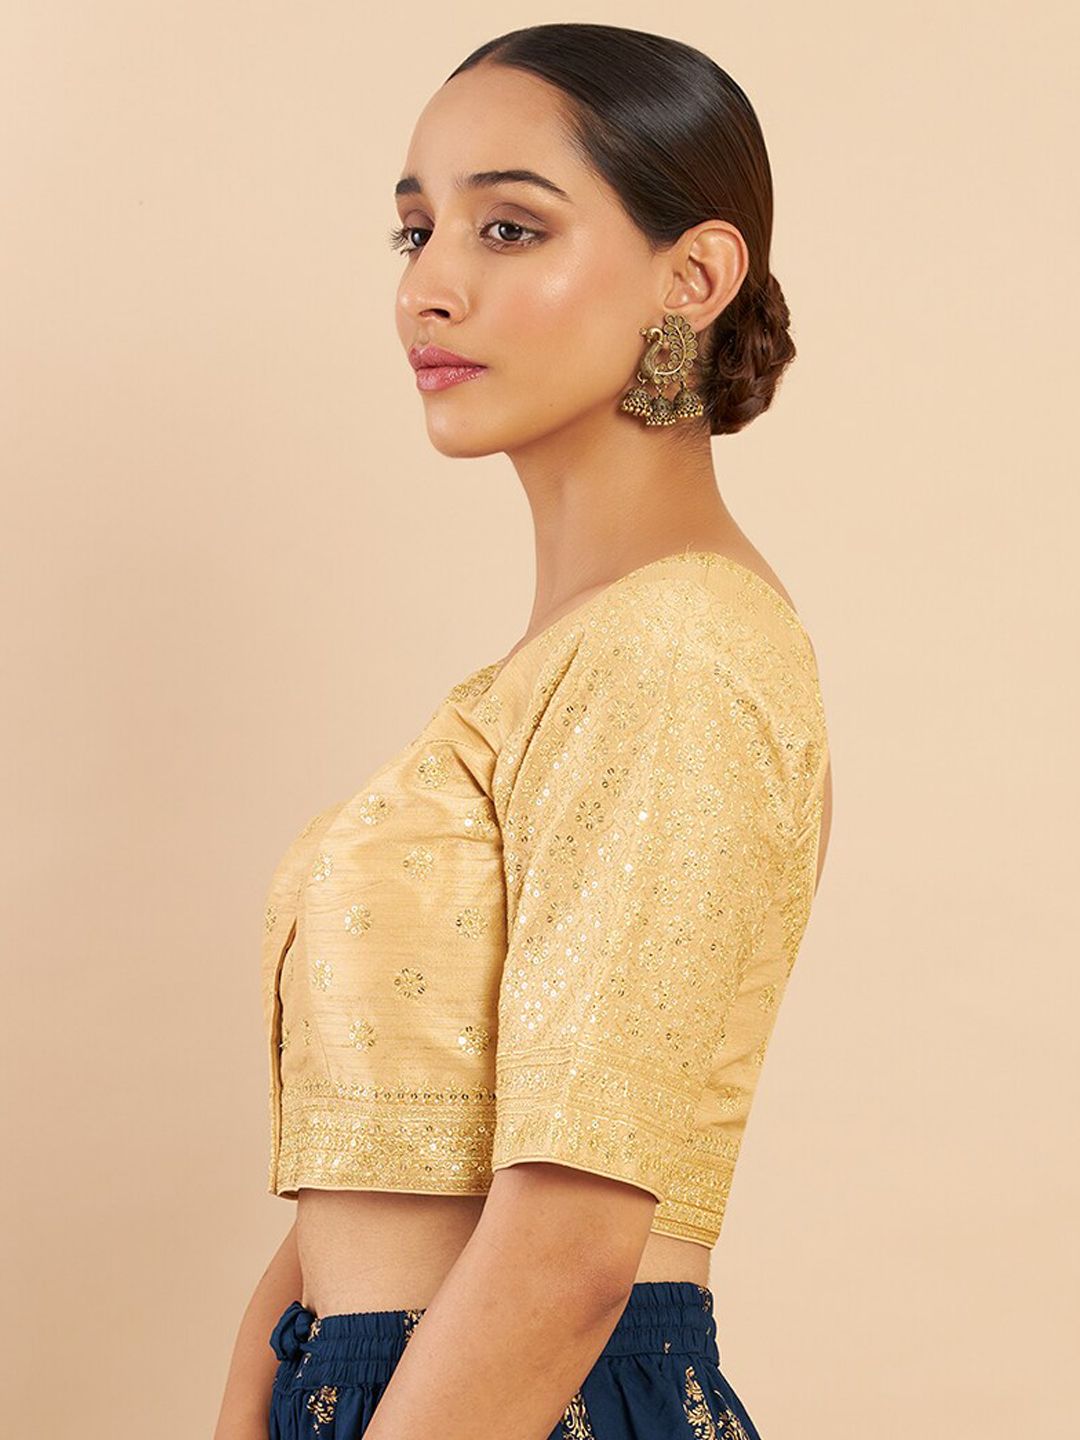 Soch Golden Embroidered Saree Blouse Price in India